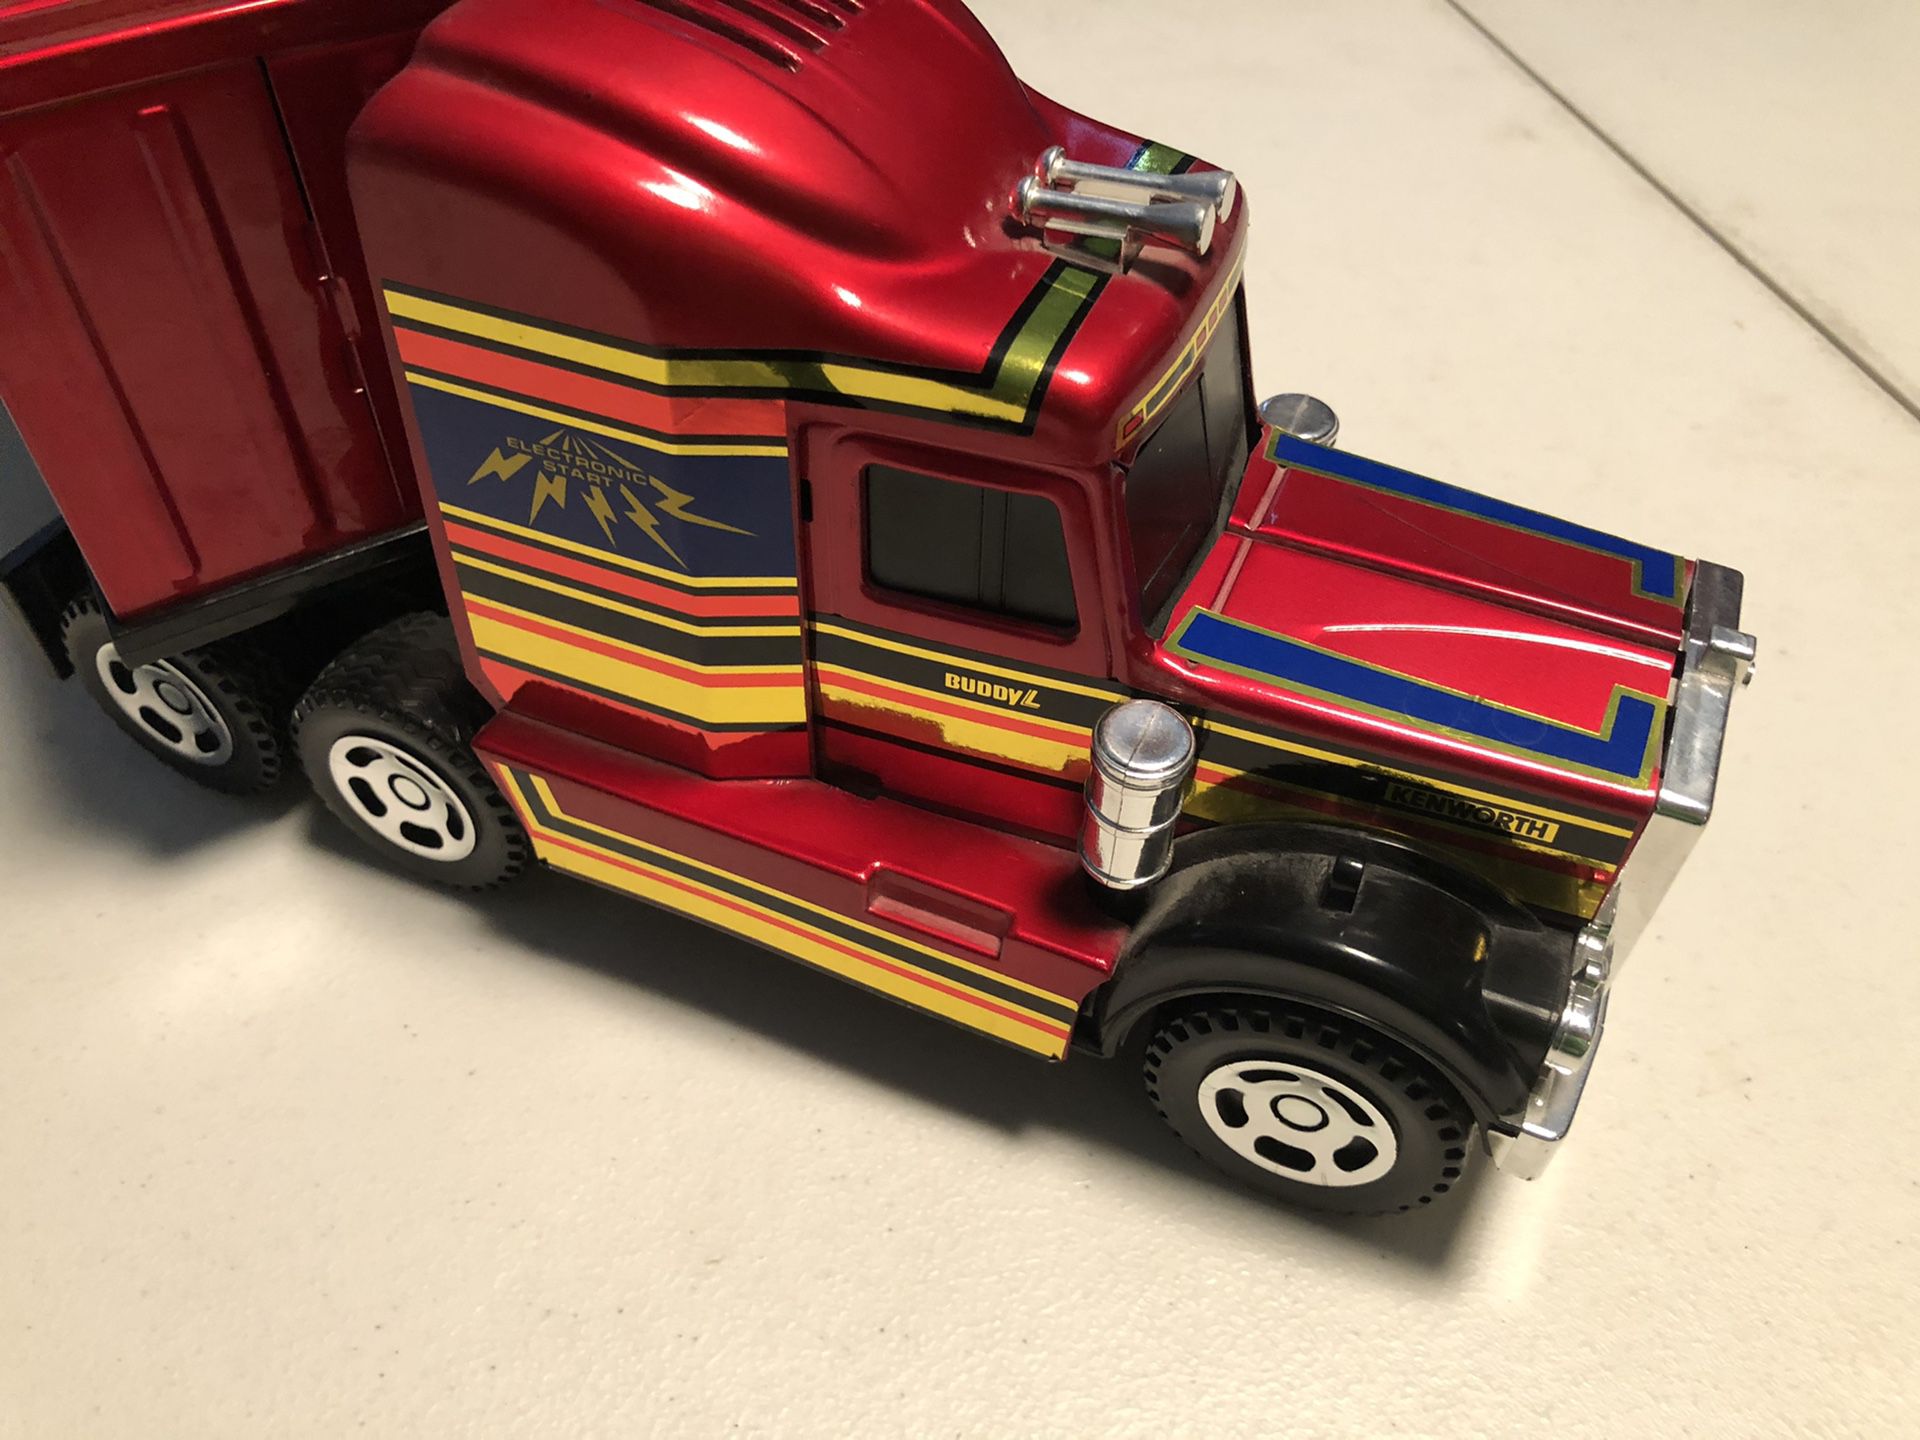 Buddy L truck and trailer Die cast